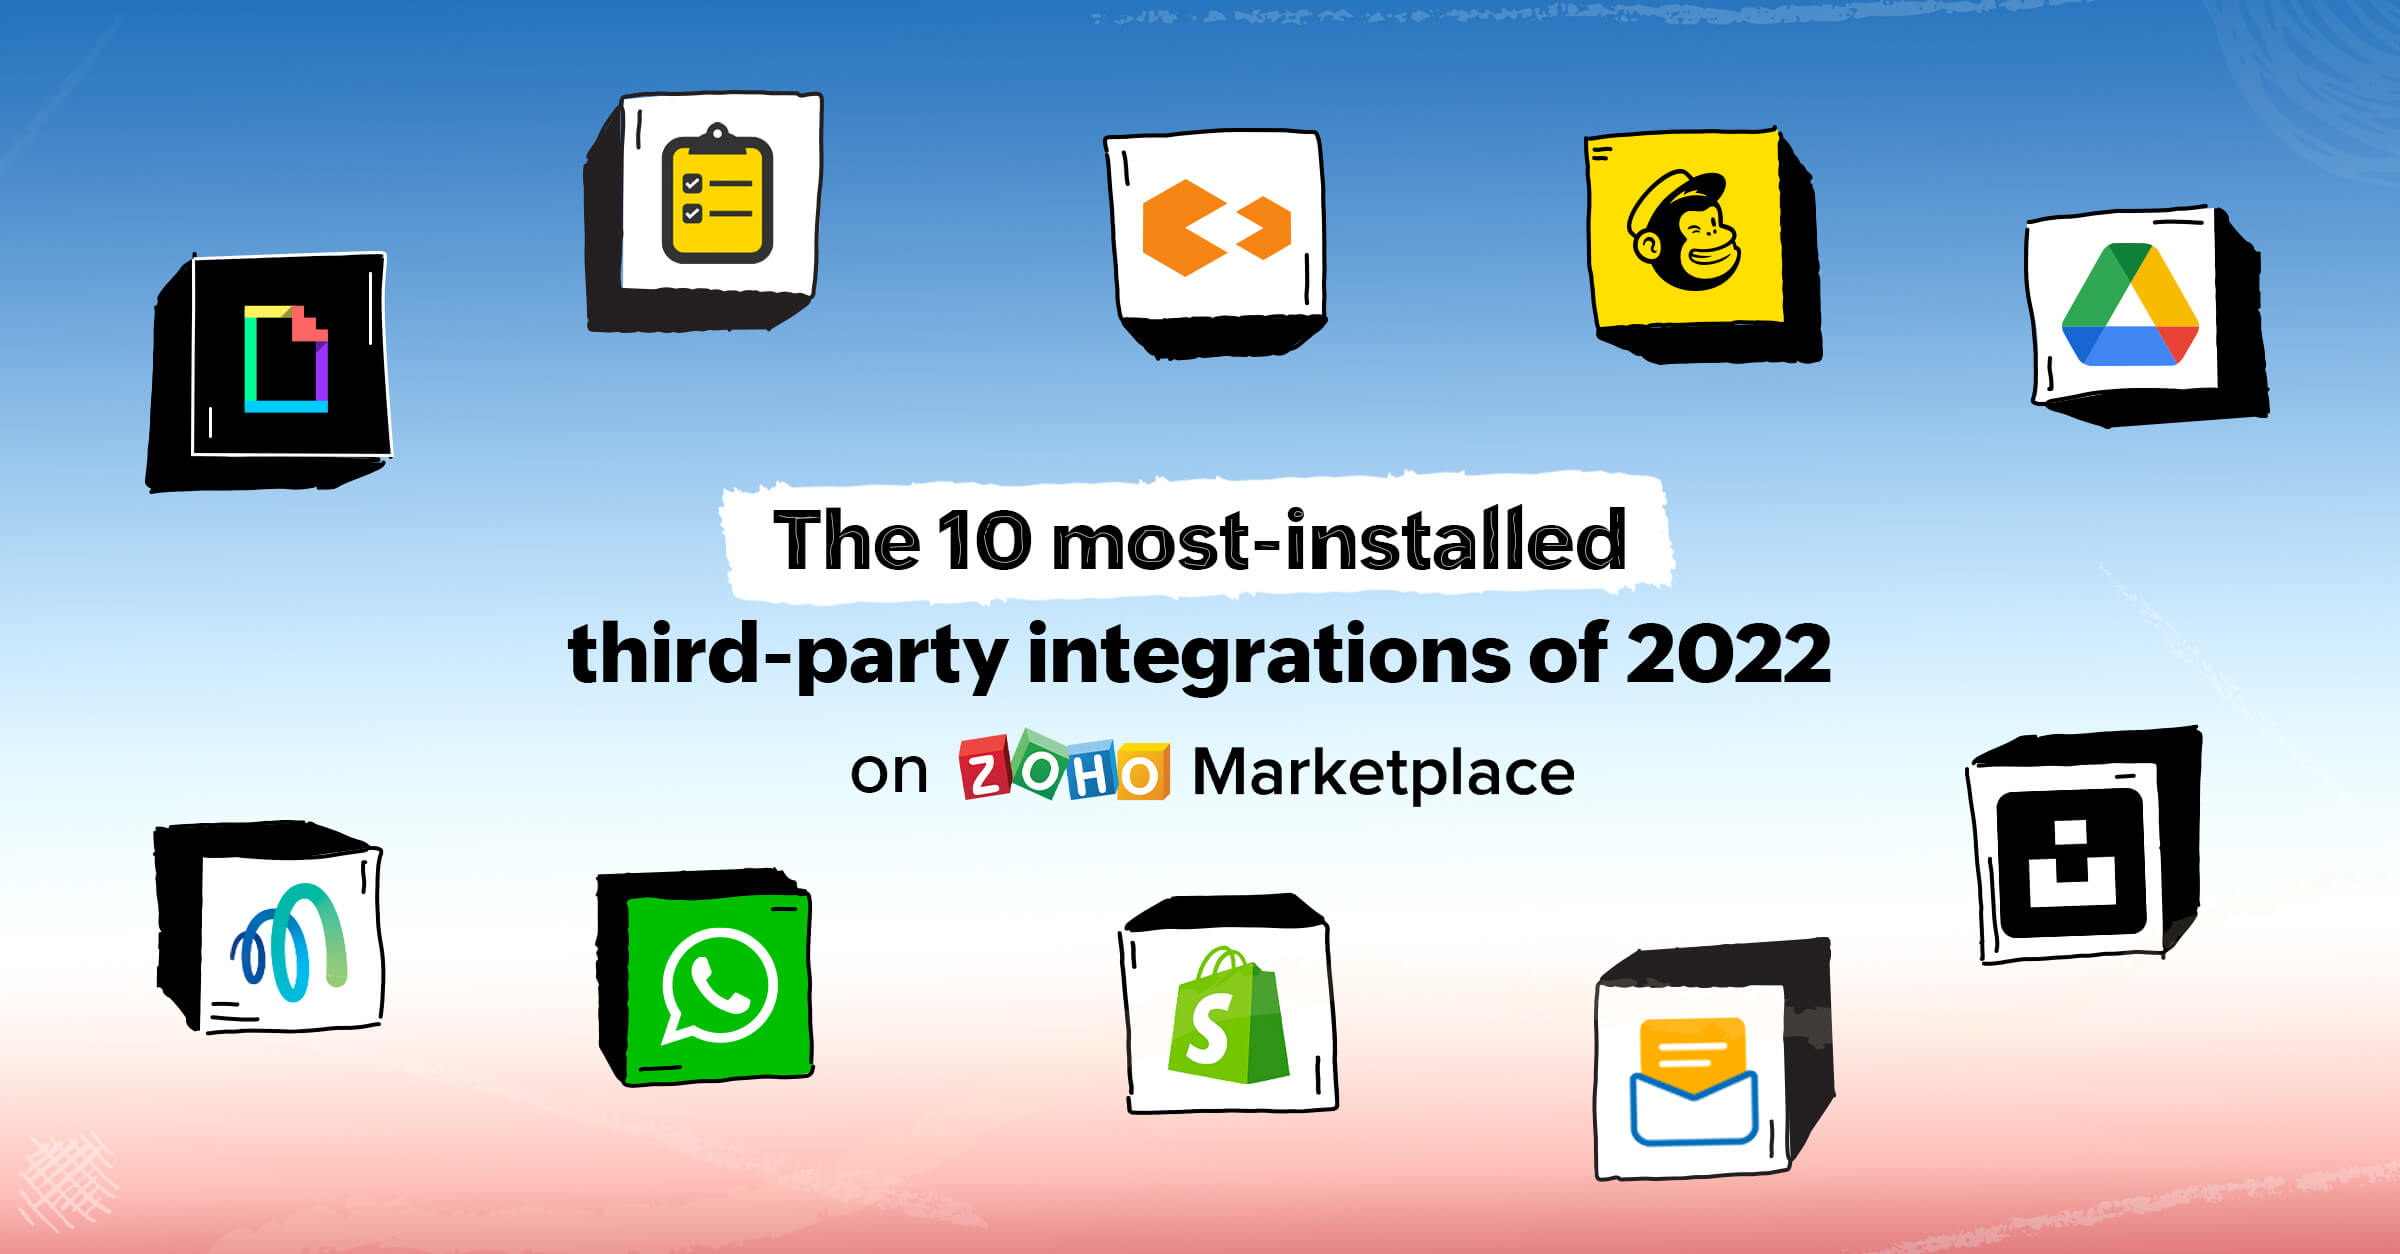 The 10 most-installed third-party integrations of 2022 on Zoho Marketplace